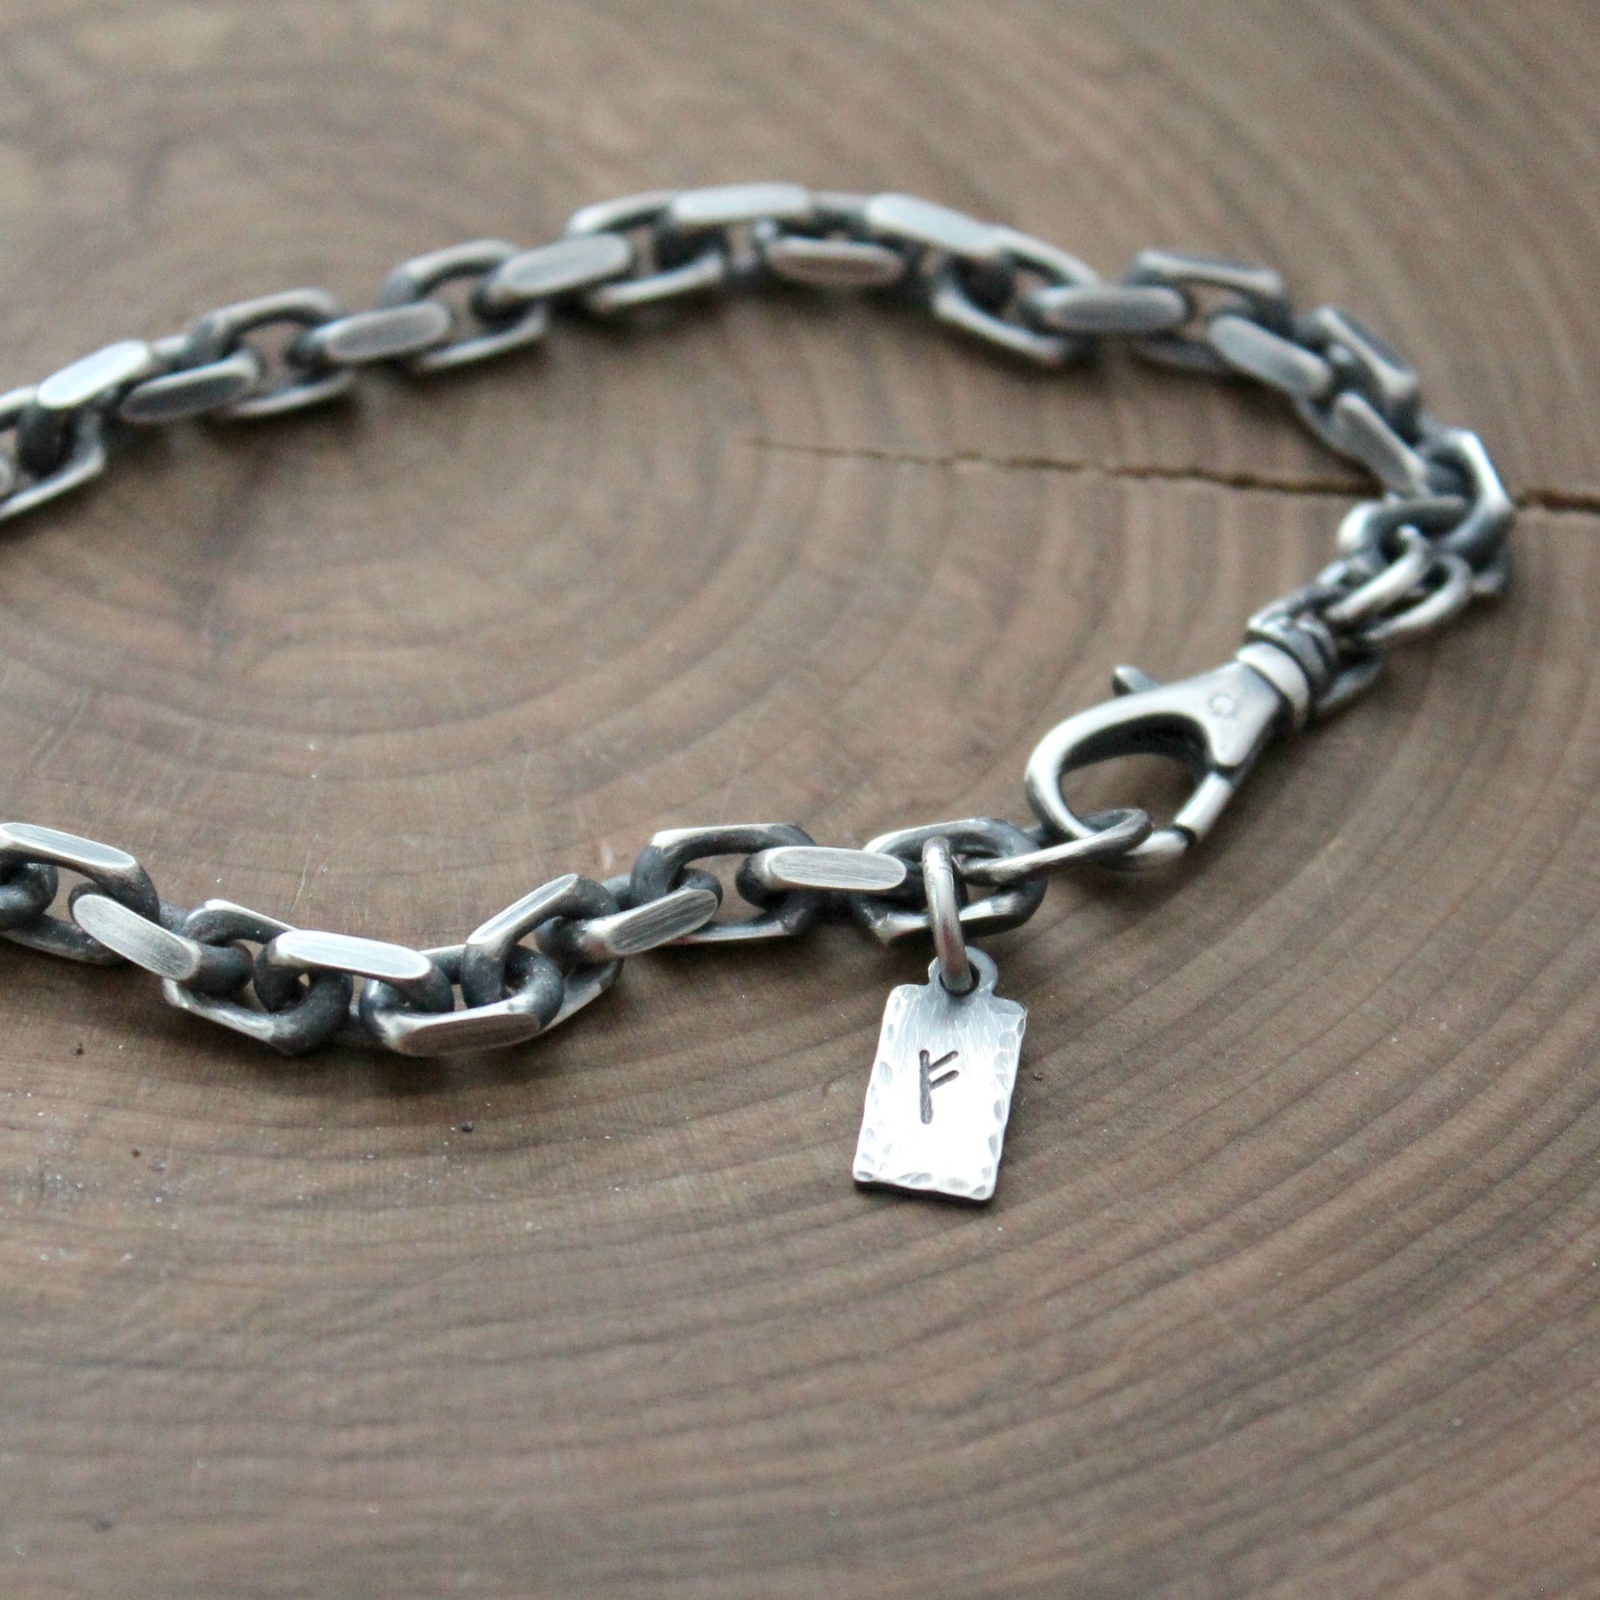 Why Are Men's Chain Bracelets a Popular Accessory?